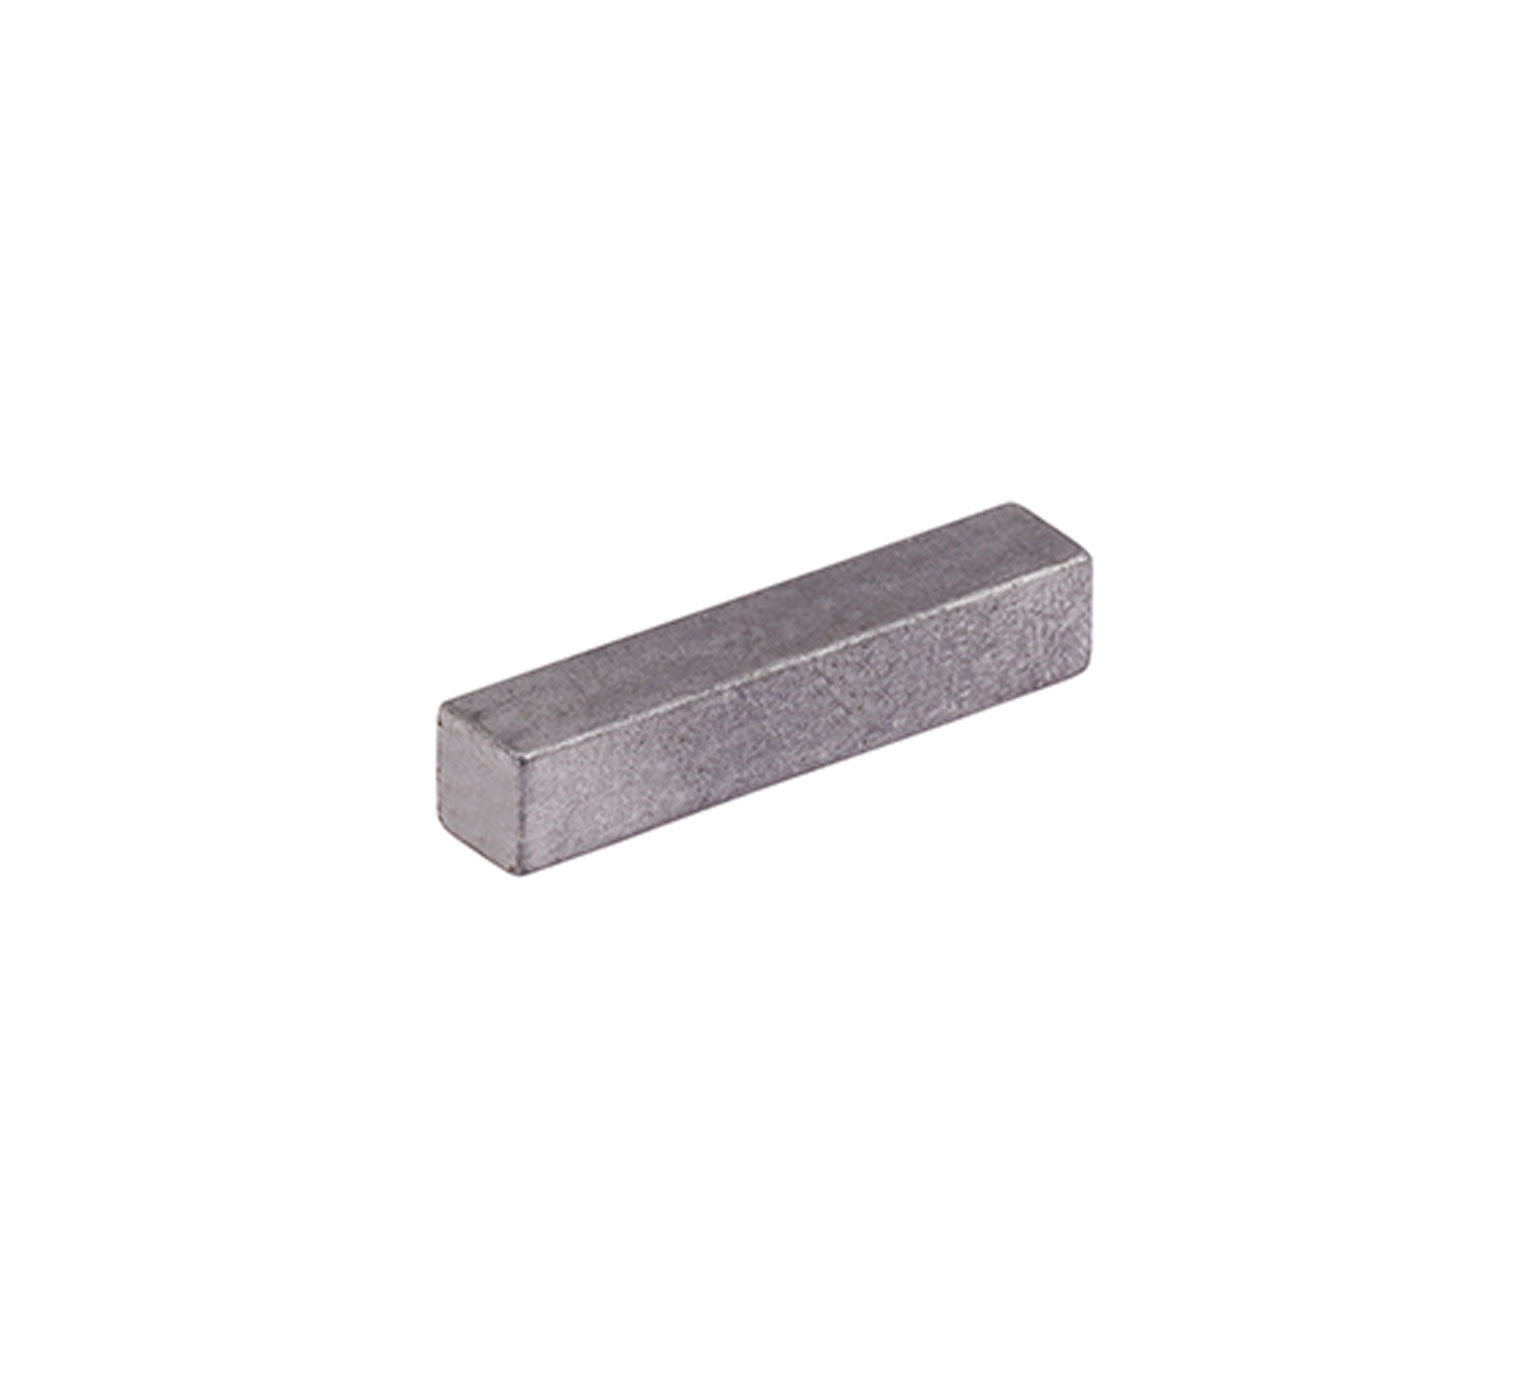 00927 Cold Rolled Steel Key - 2.5 x 2.5 x 1.25 in alt 1